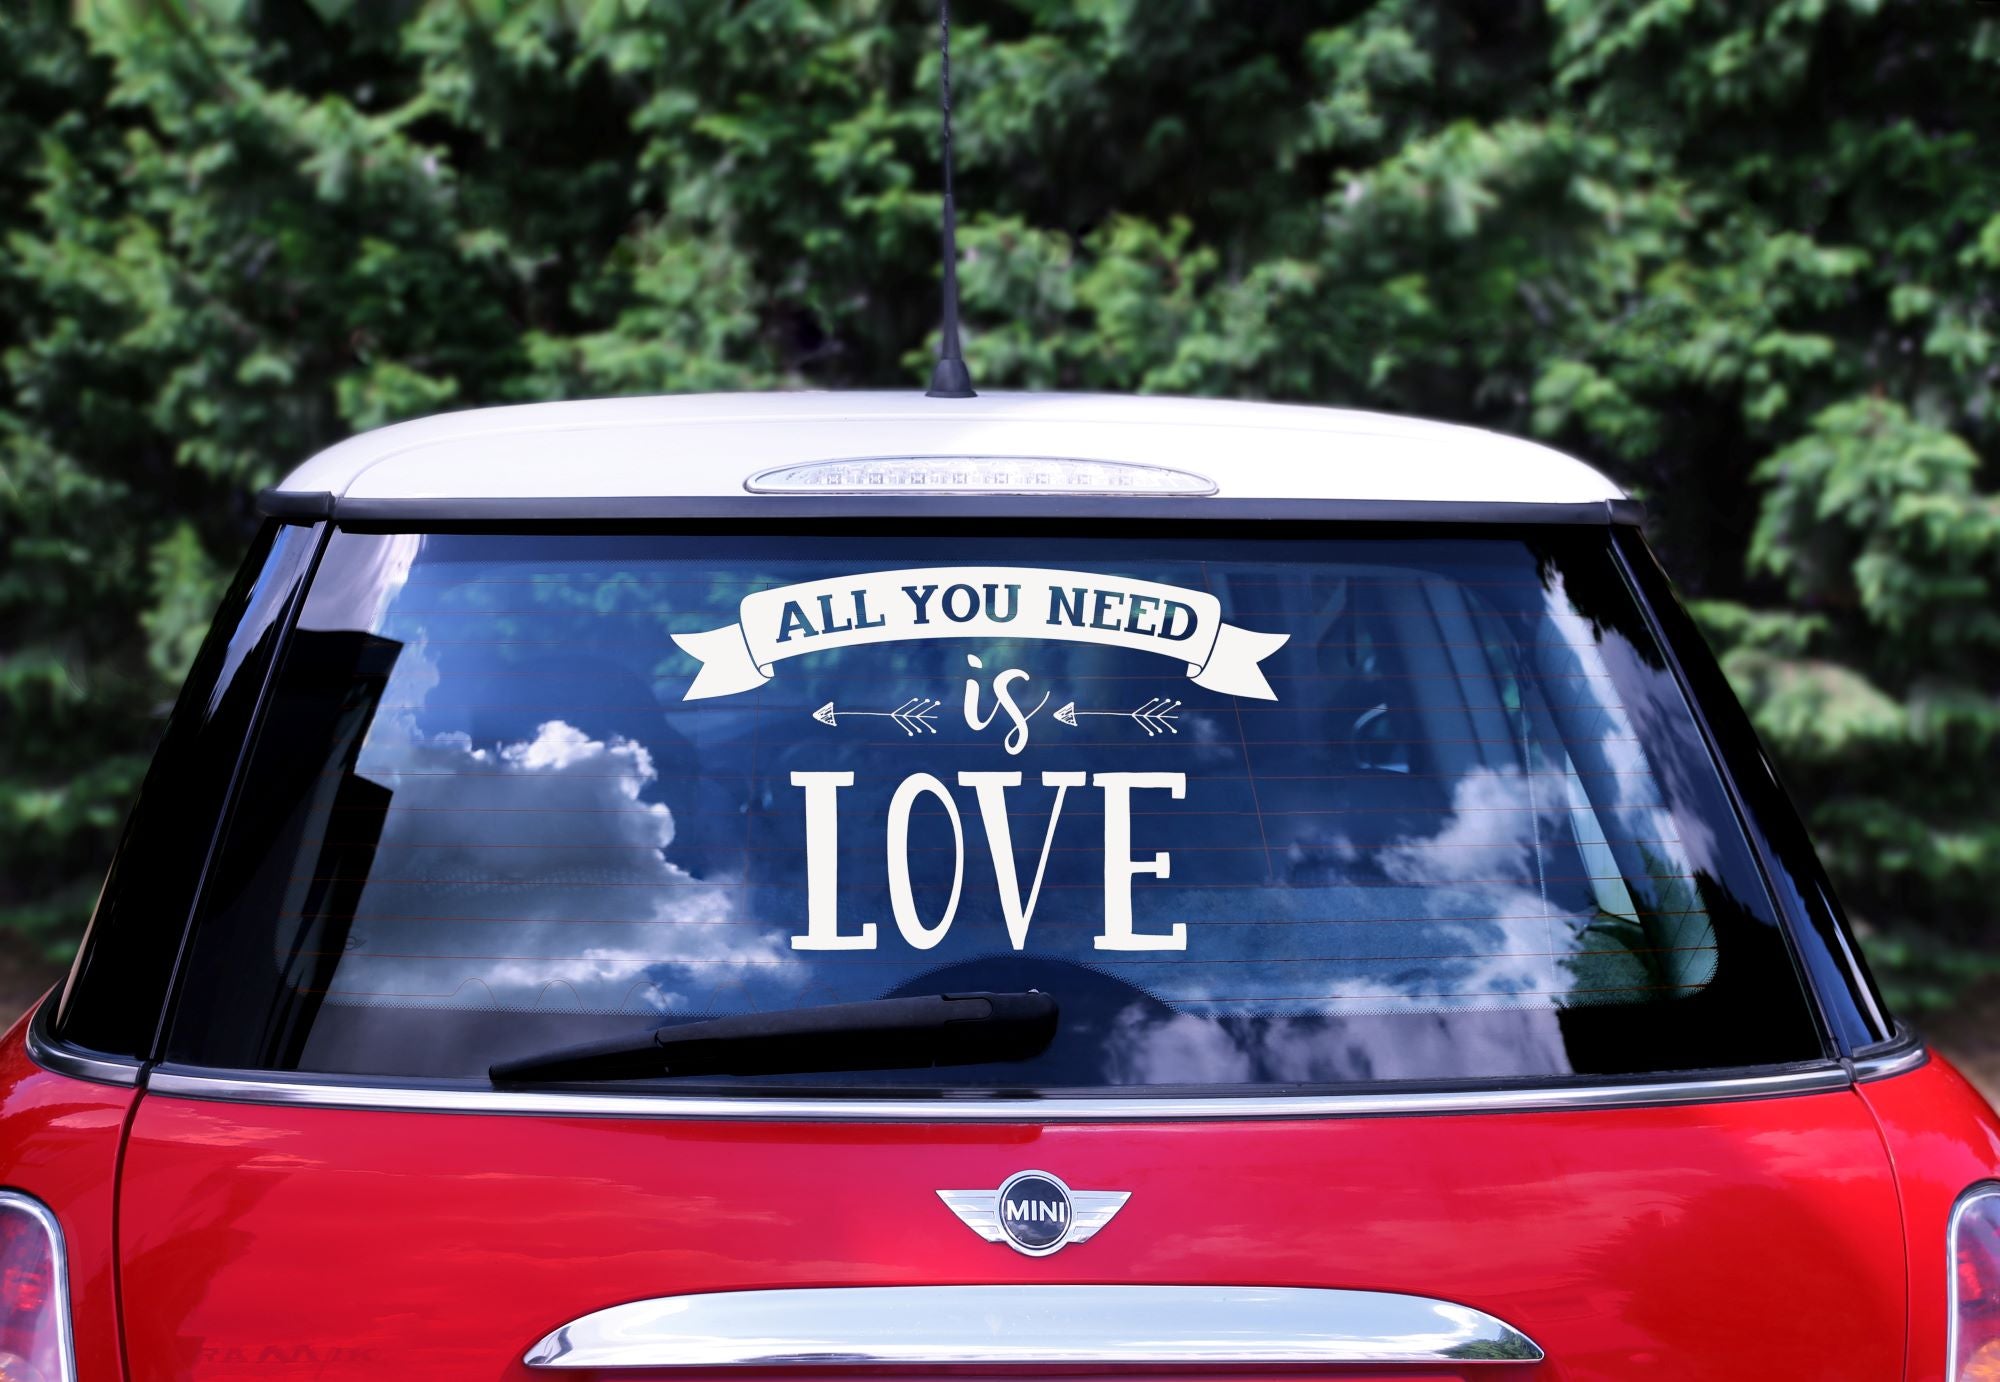 All you need is Love Wedding Car Sticker Decoration